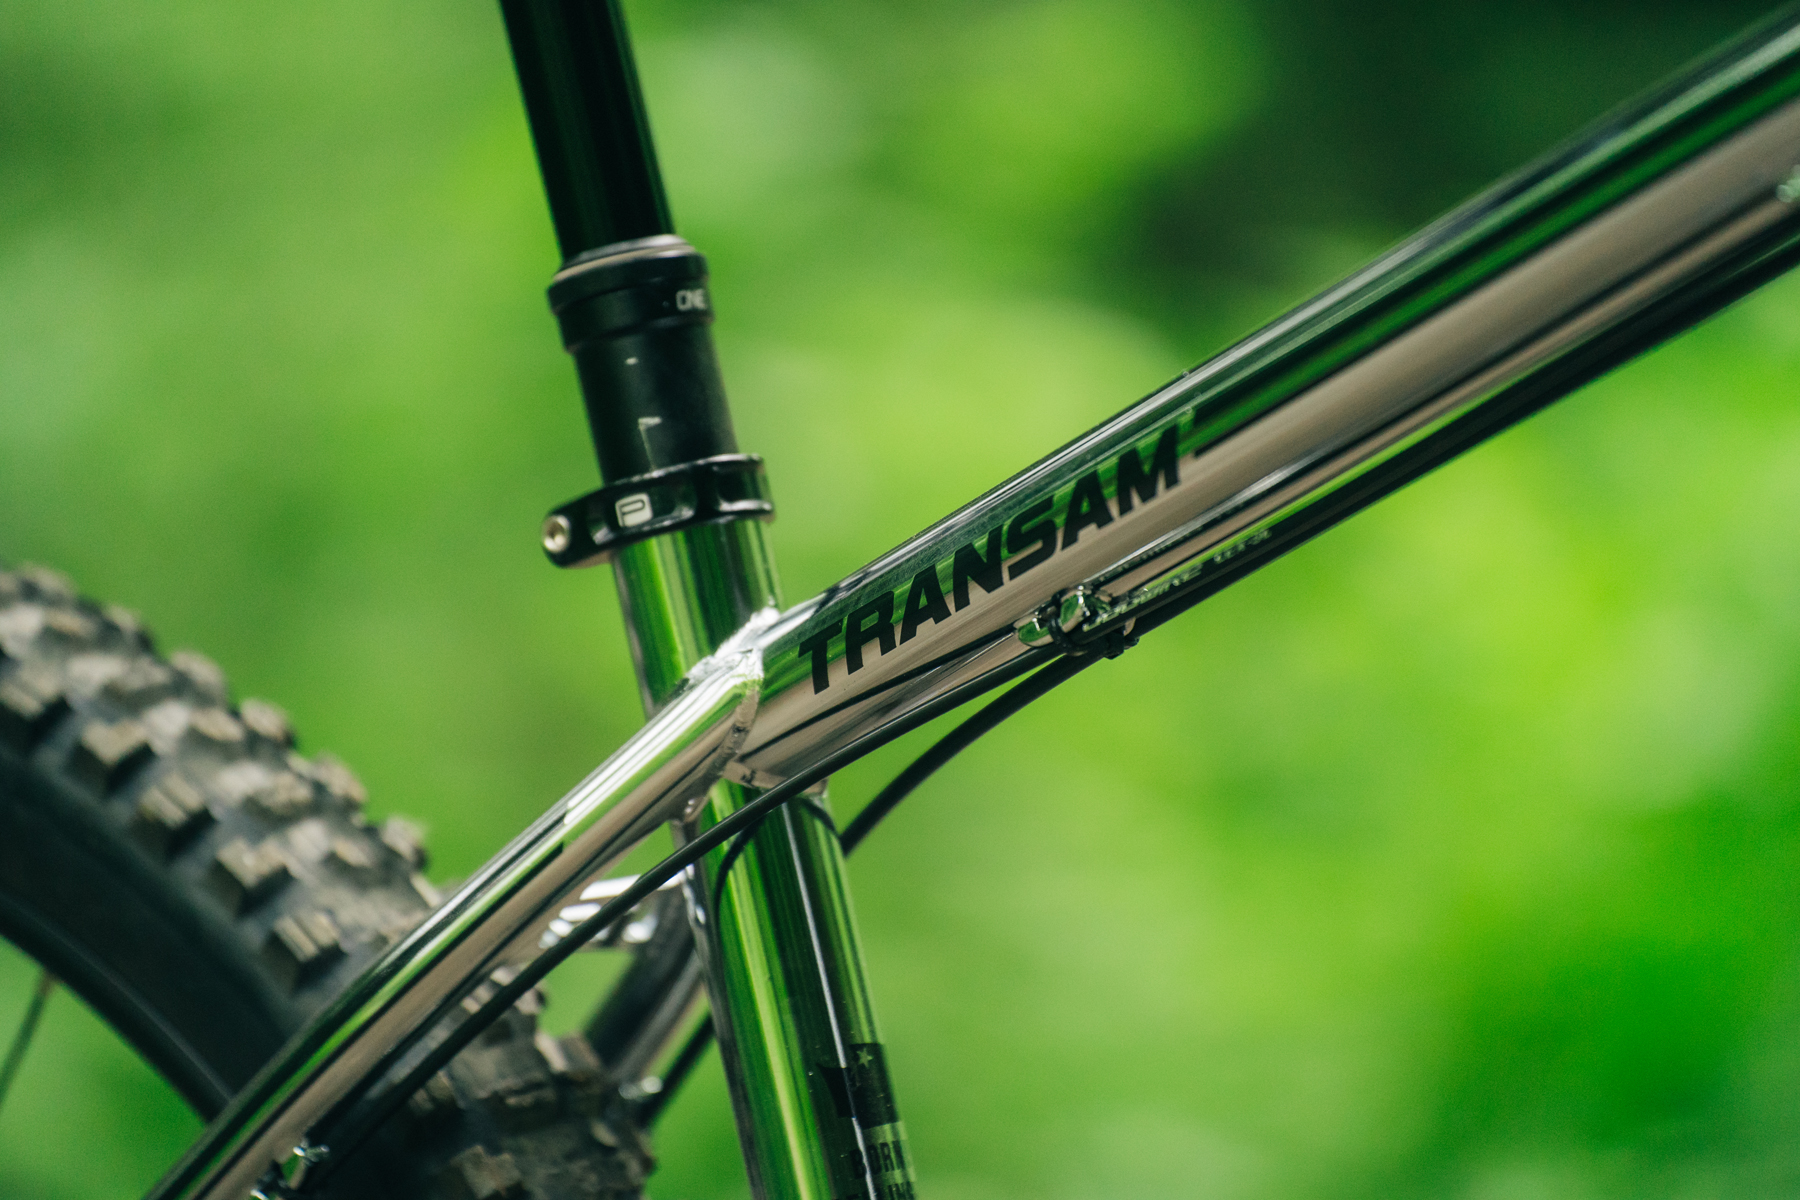 David Golay reviews the Transition TransAM for Blister